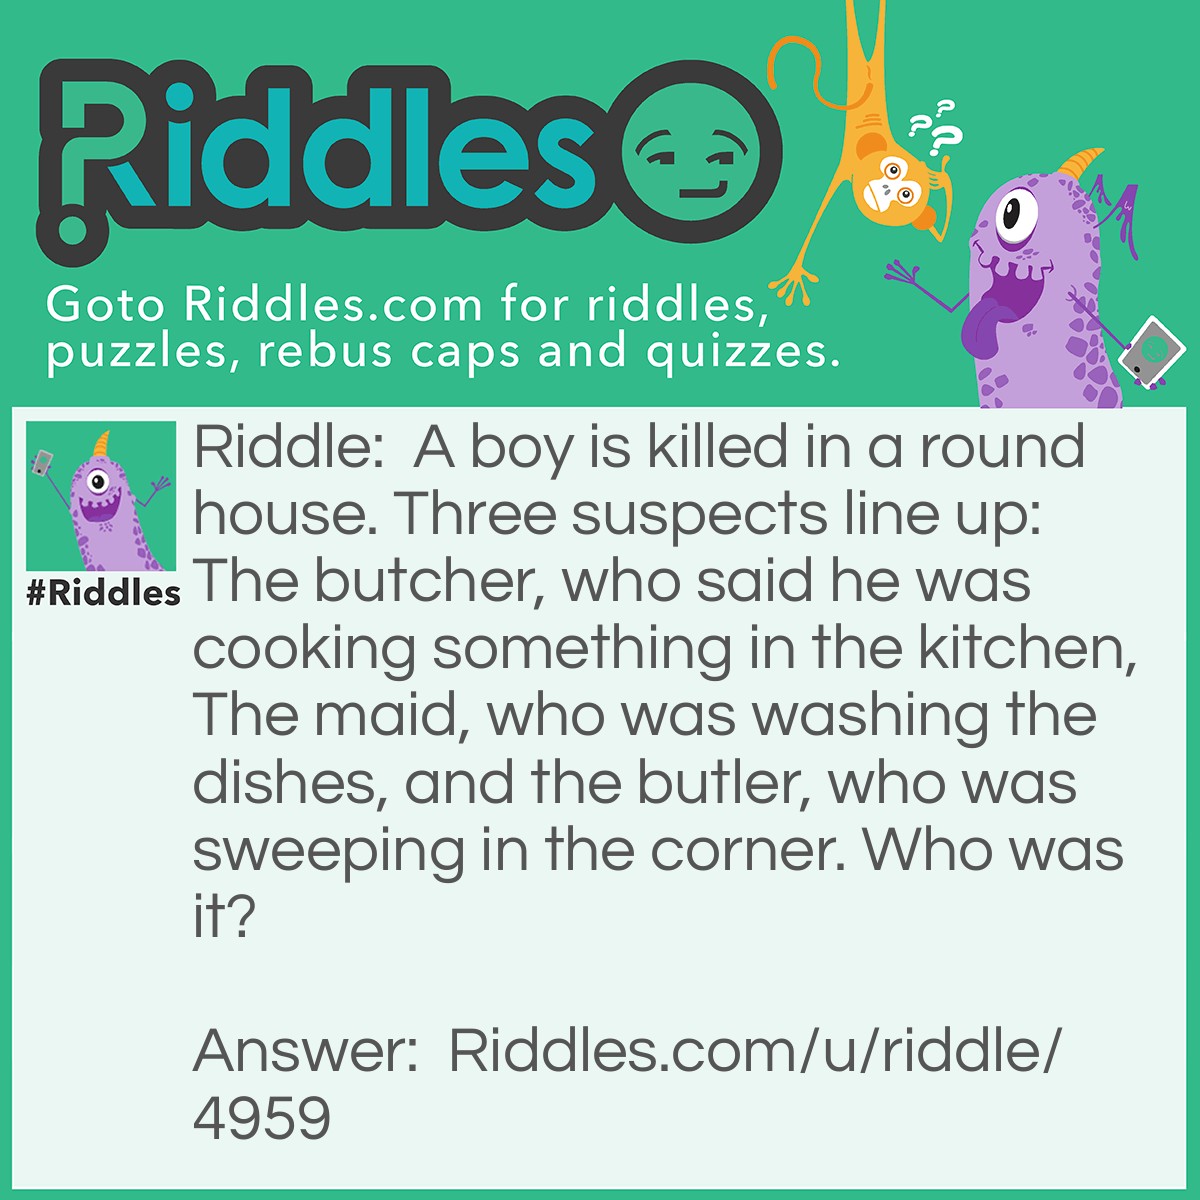 Riddle: A boy is killed in a round house. Three suspects line up: The butcher, who said he was cooking something in the kitchen, The maid, who was washing the dishes, and the butler, who was sweeping in the corner. Who was it? Answer: The Butler, he said he was sweeping in the corners, but it's a round house!